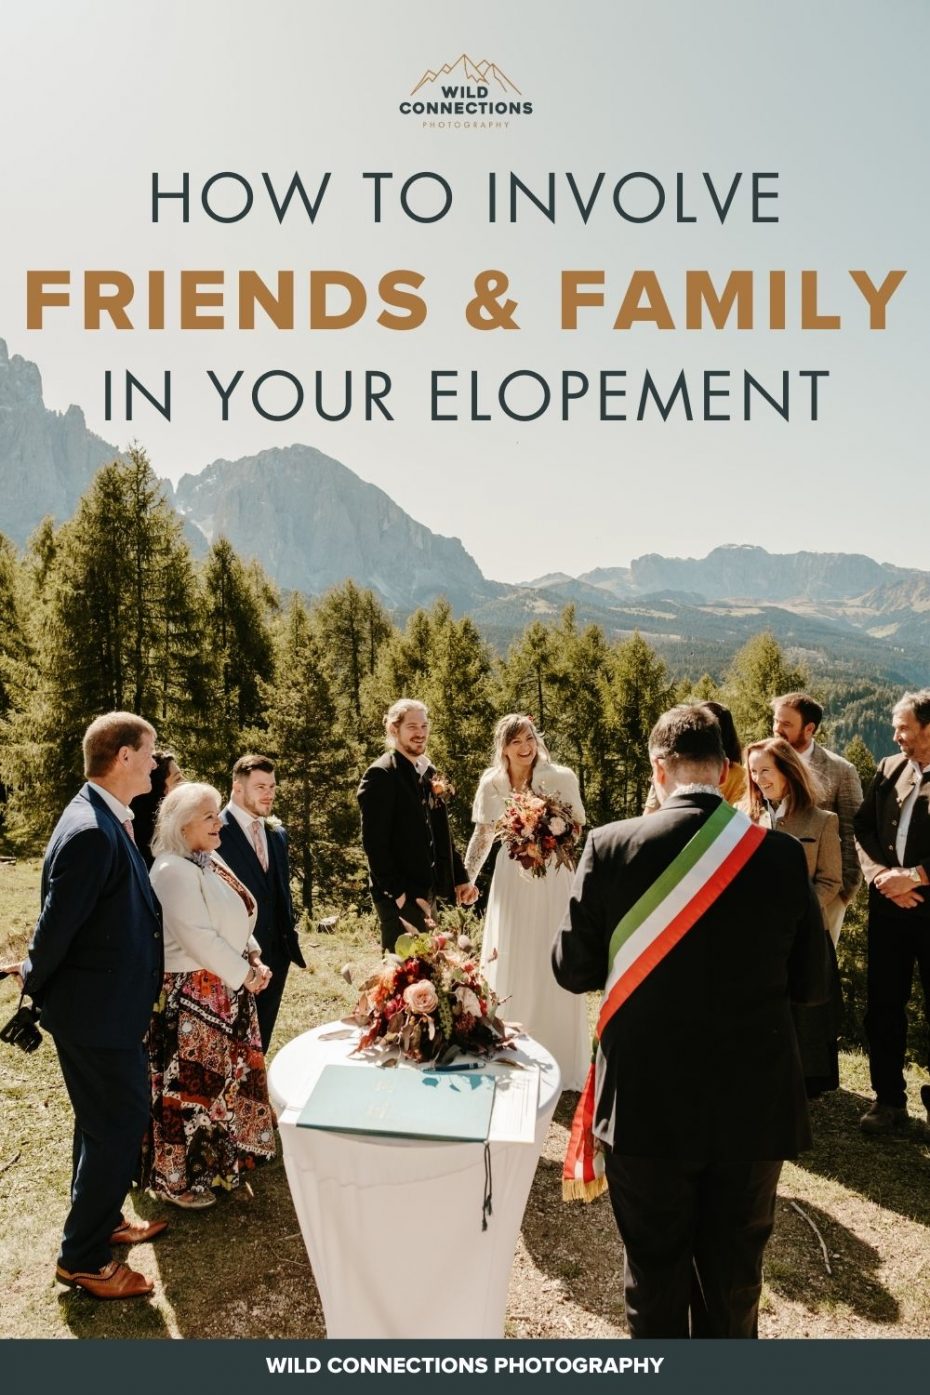 This couple include family in their elopement by having them attend the civil ceremony